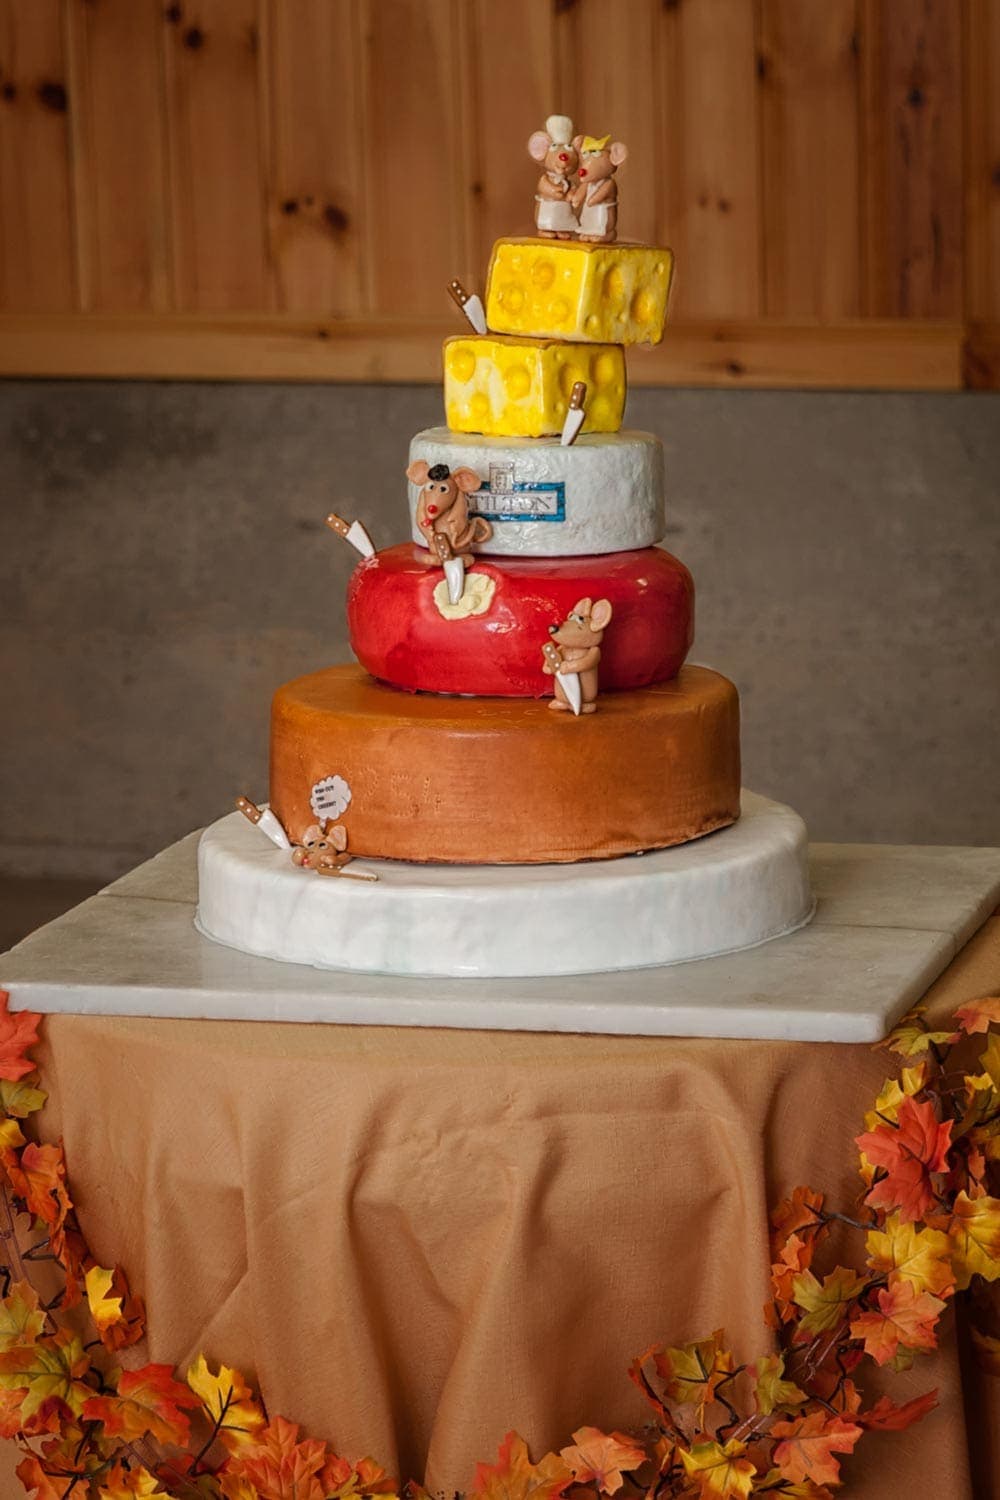 A 5 tier cheesecake themed wedding cake with mice on each level.